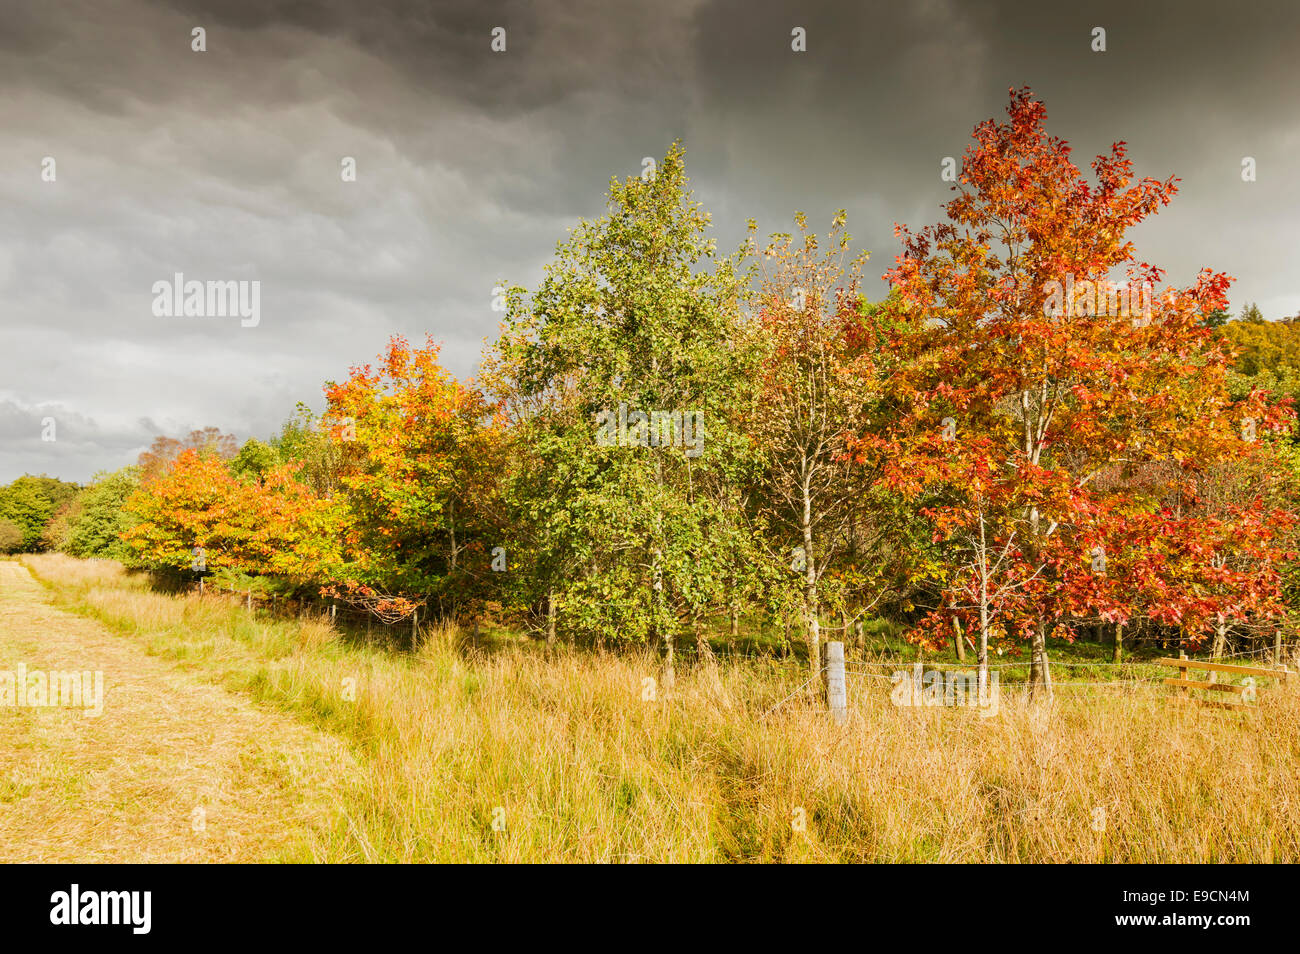 SPEYSIDE WAY OR TRAIL IN SCOTLAND WITH TREE LEAVES TURNING TO AUTUMN COLOURS Stock Photo